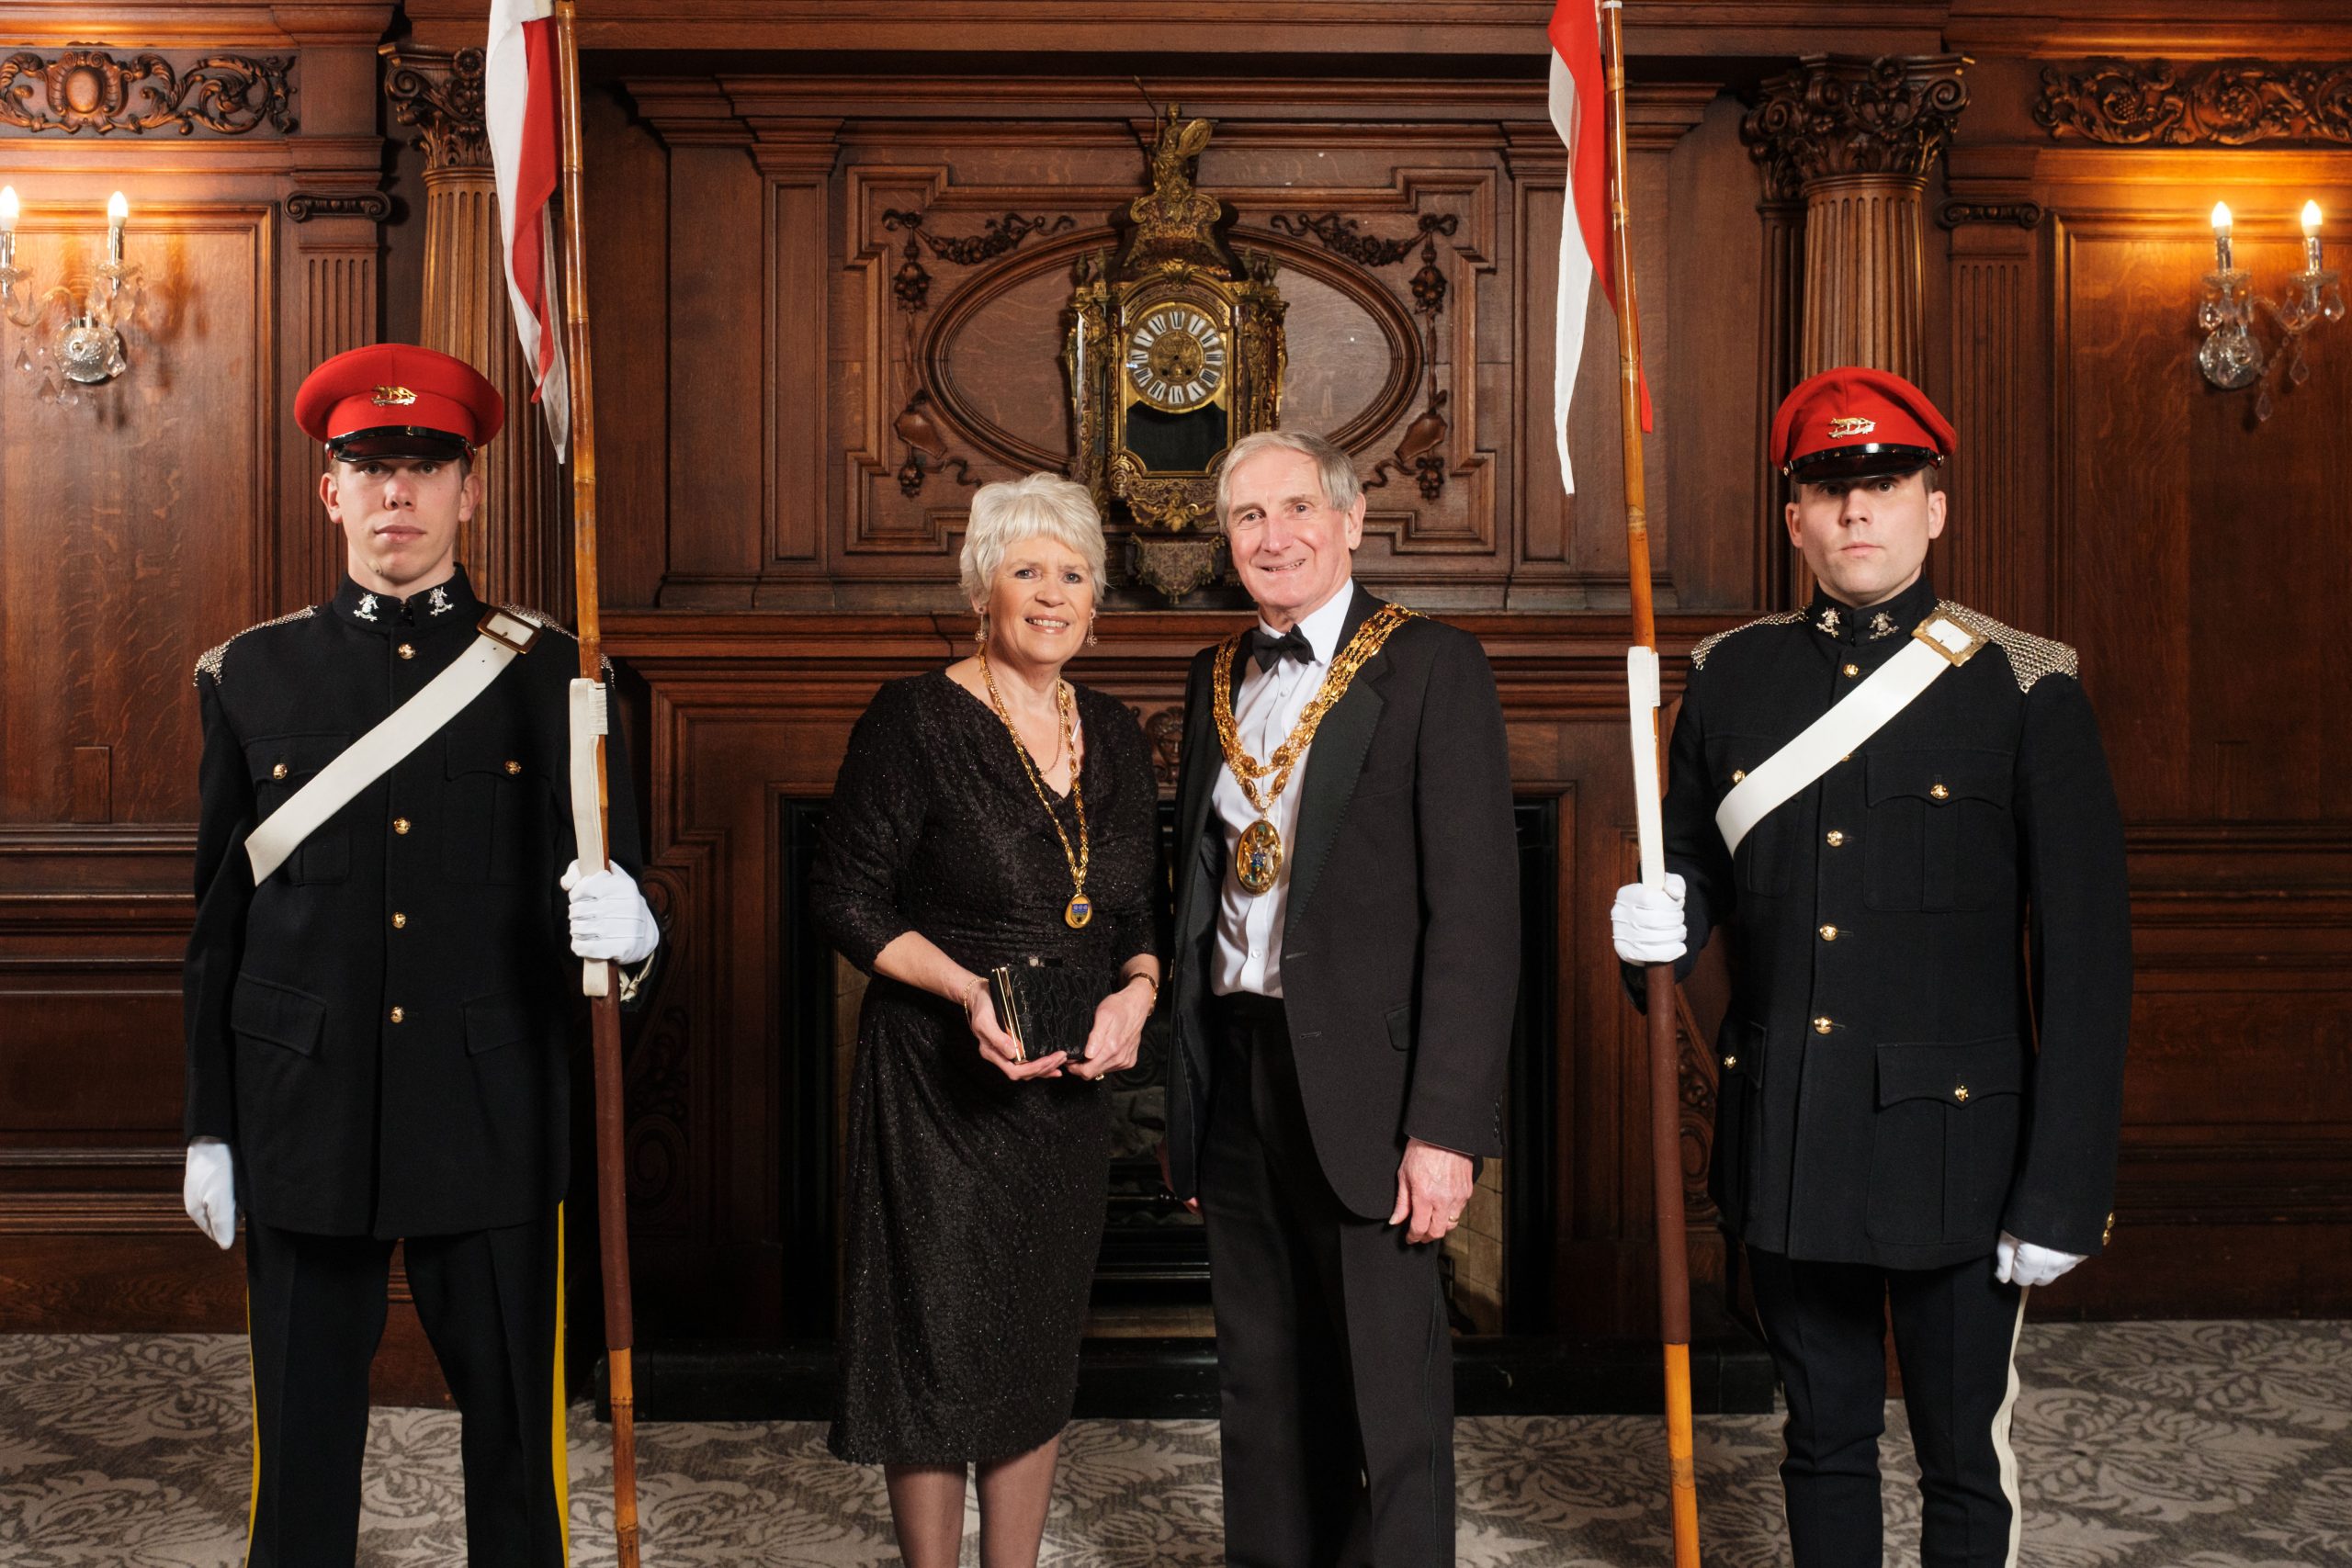 The Lord and Lady Mayoress of York